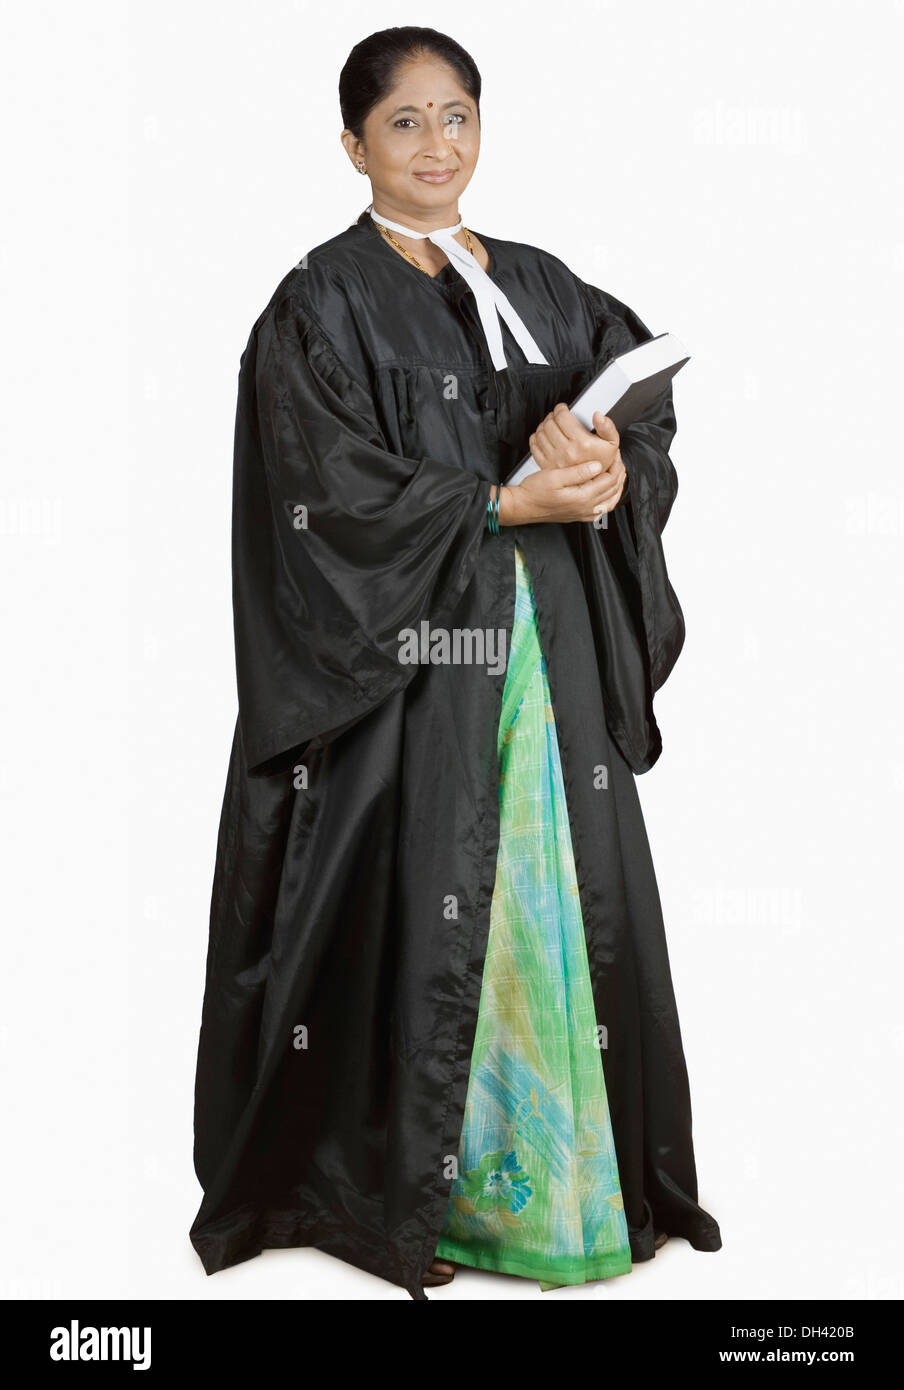 692 Lawyer Black Gown Images, Stock Photos, 3D objects, & Vectors |  Shutterstock